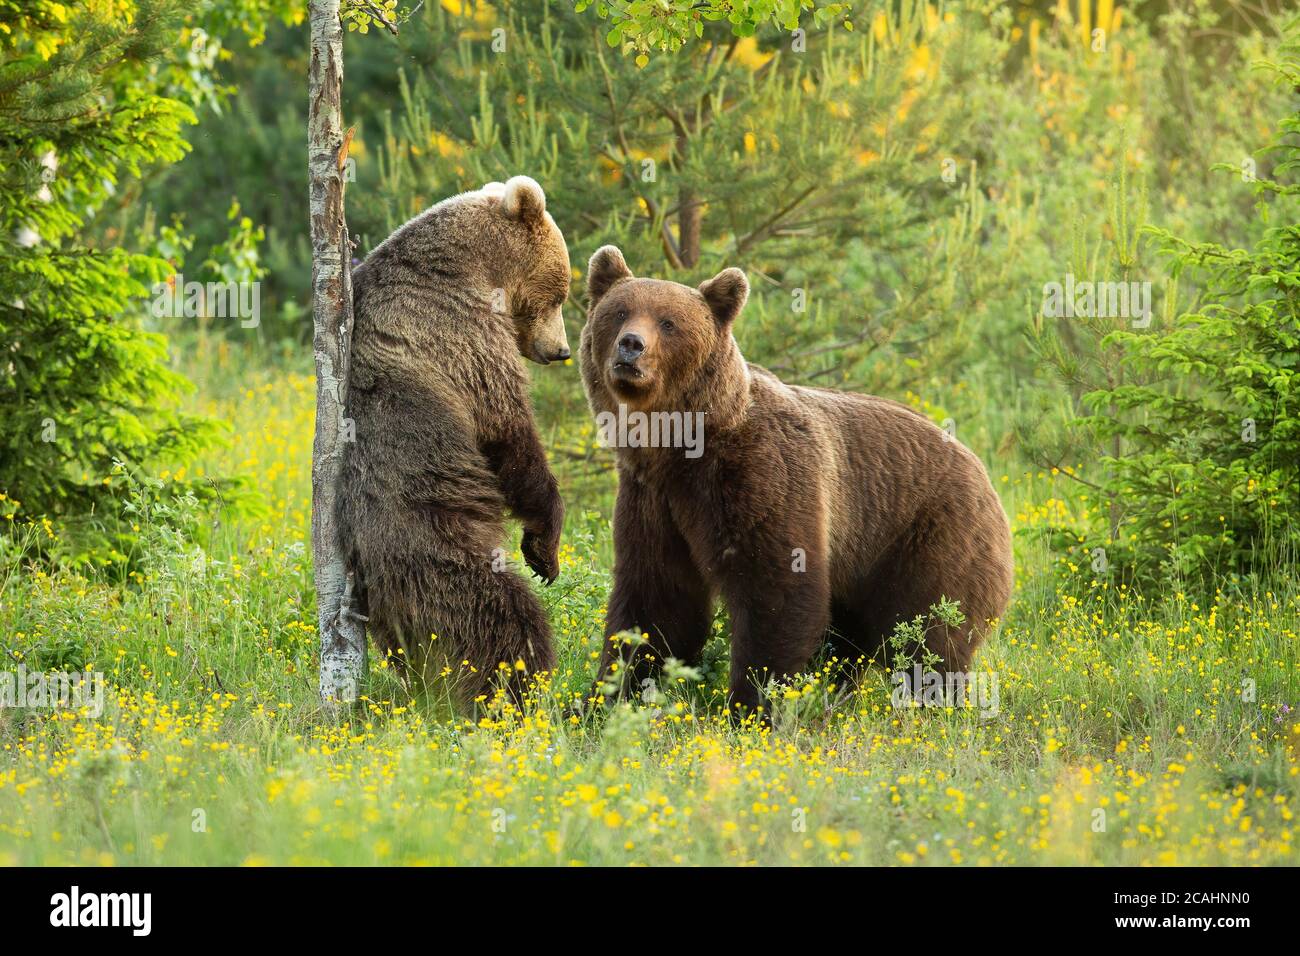 Two brown bears courting on a blooming glade with flowers in summer nature. Stock Photo